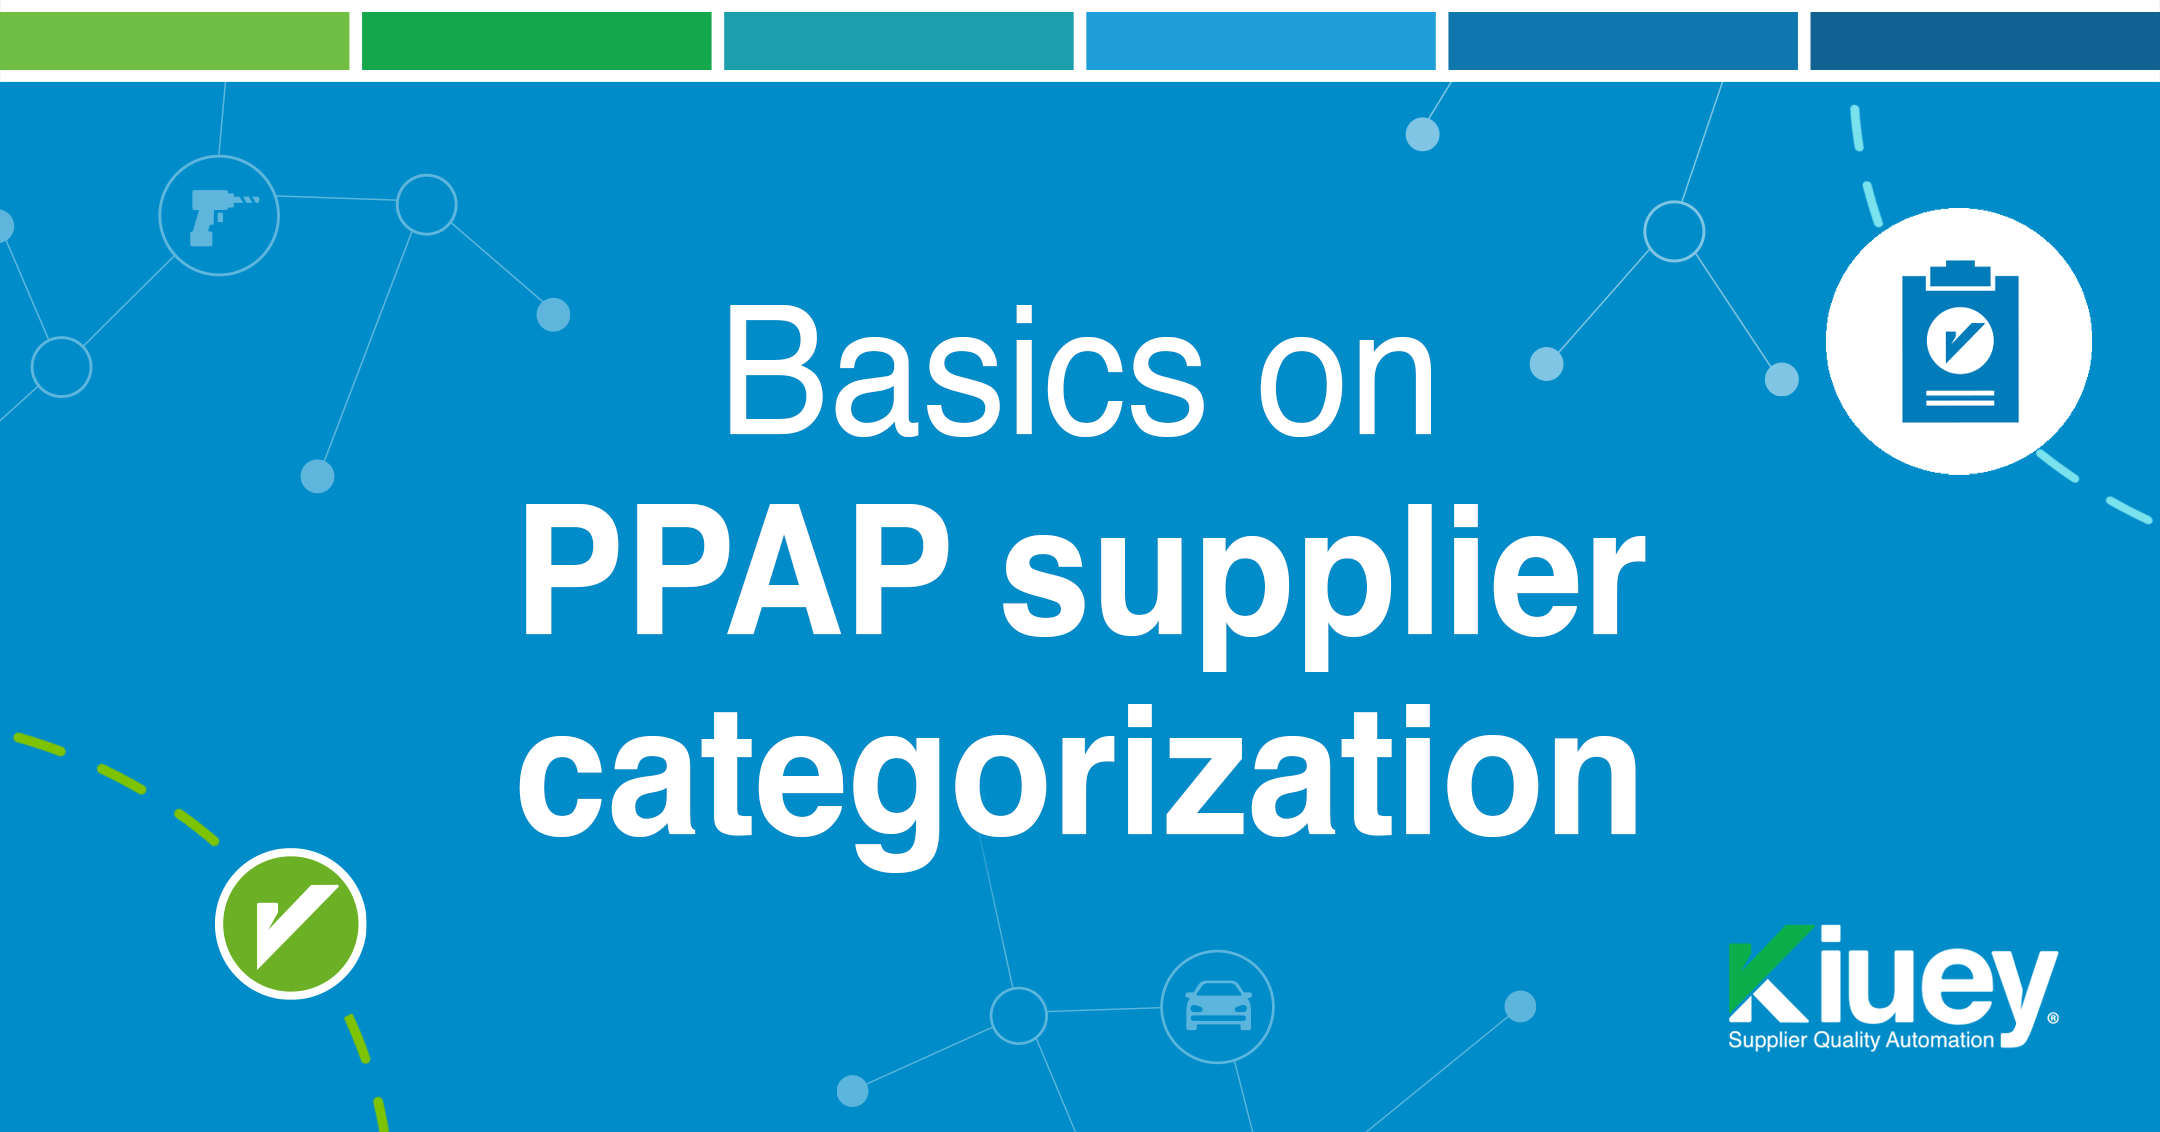 A quick guide to PPAP supplier categorization